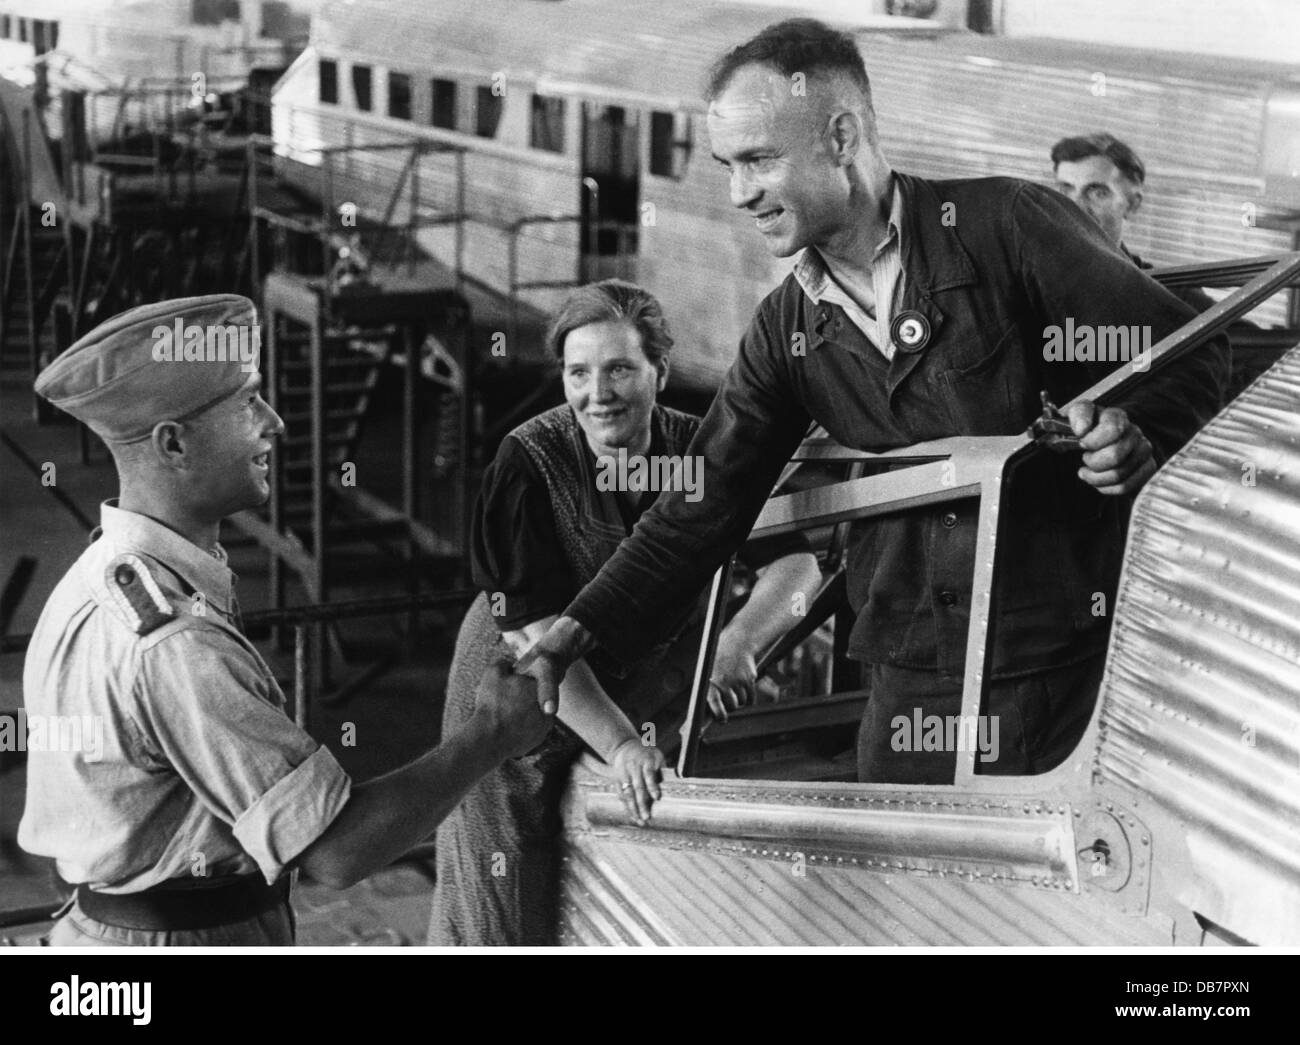 events, Second World War / WWII, propaganda, German soldier, flight mechanic in a transport plane Junkers Ju 52, visiting his parents at the Junkers plant in Dessau, circa 1942, sequel of propaganda photos, Additional-Rights-Clearences-Not Available Stock Photo